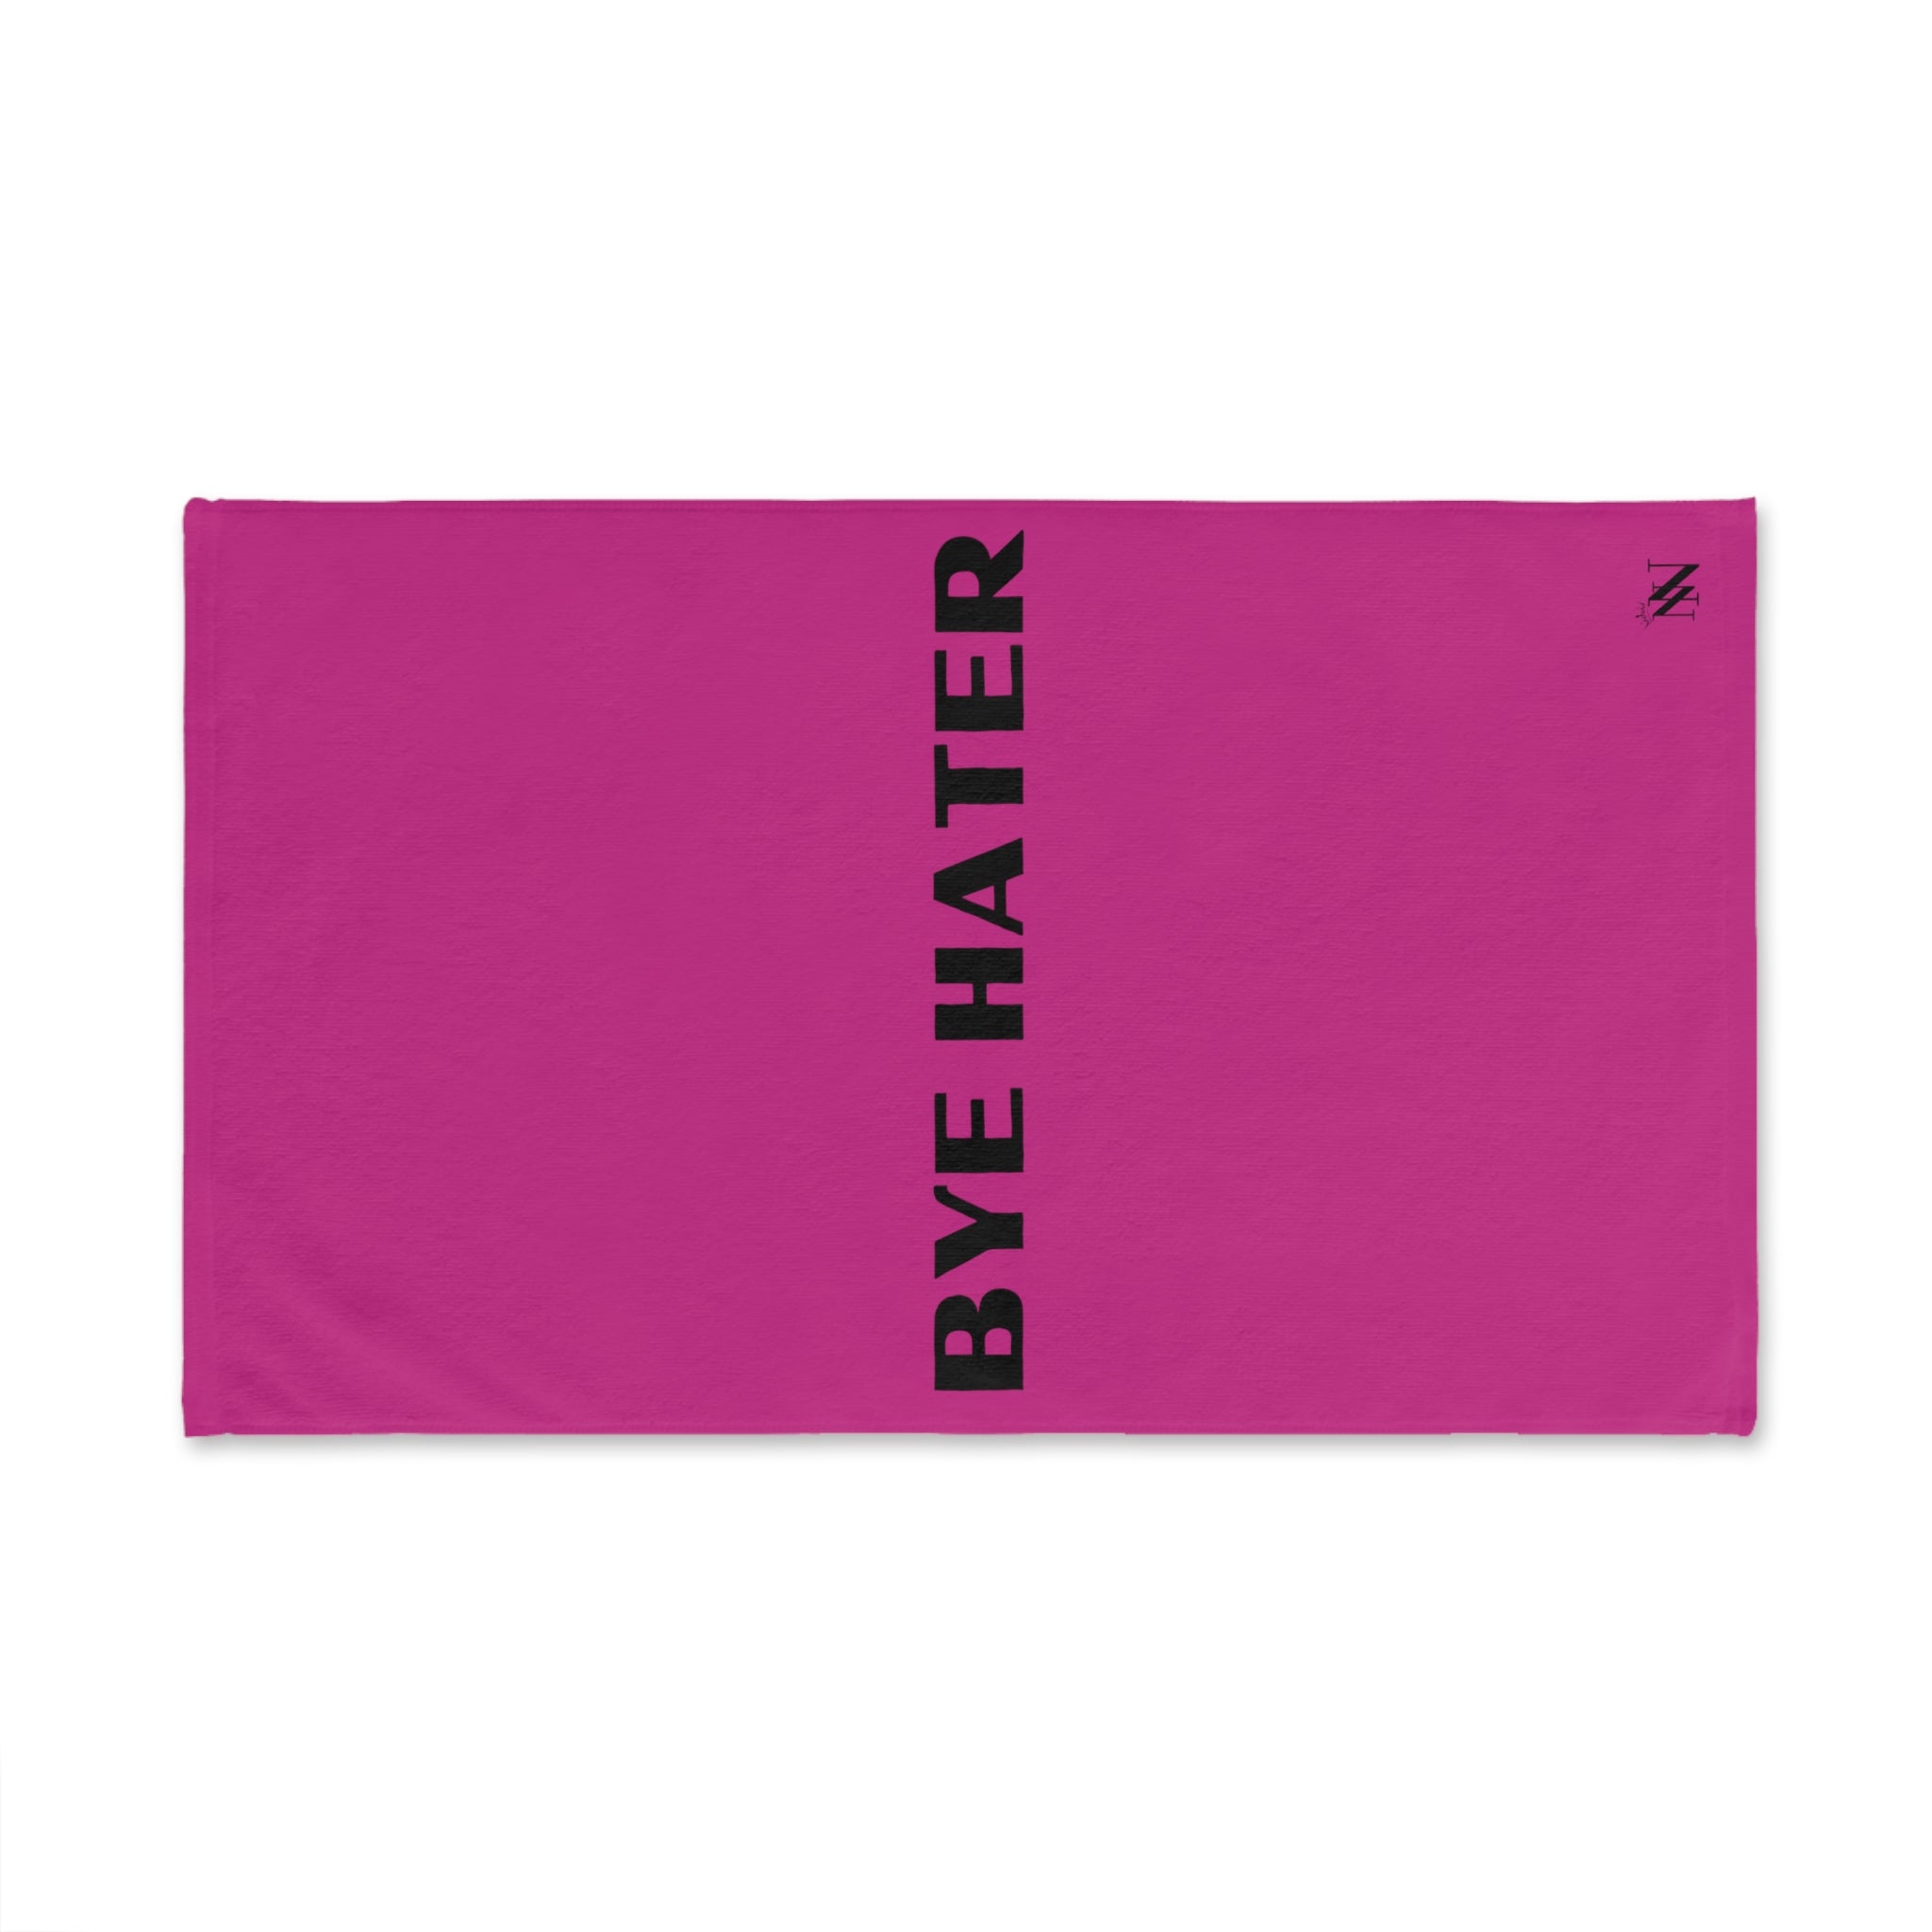 BYE Hater Fun Fuscia | Funny Gifts for Men - Gifts for Him - Birthday Gifts for Men, Him, Husband, Boyfriend, New Couple Gifts, Fathers & Valentines Day Gifts, Hand Towels NECTAR NAPKINS